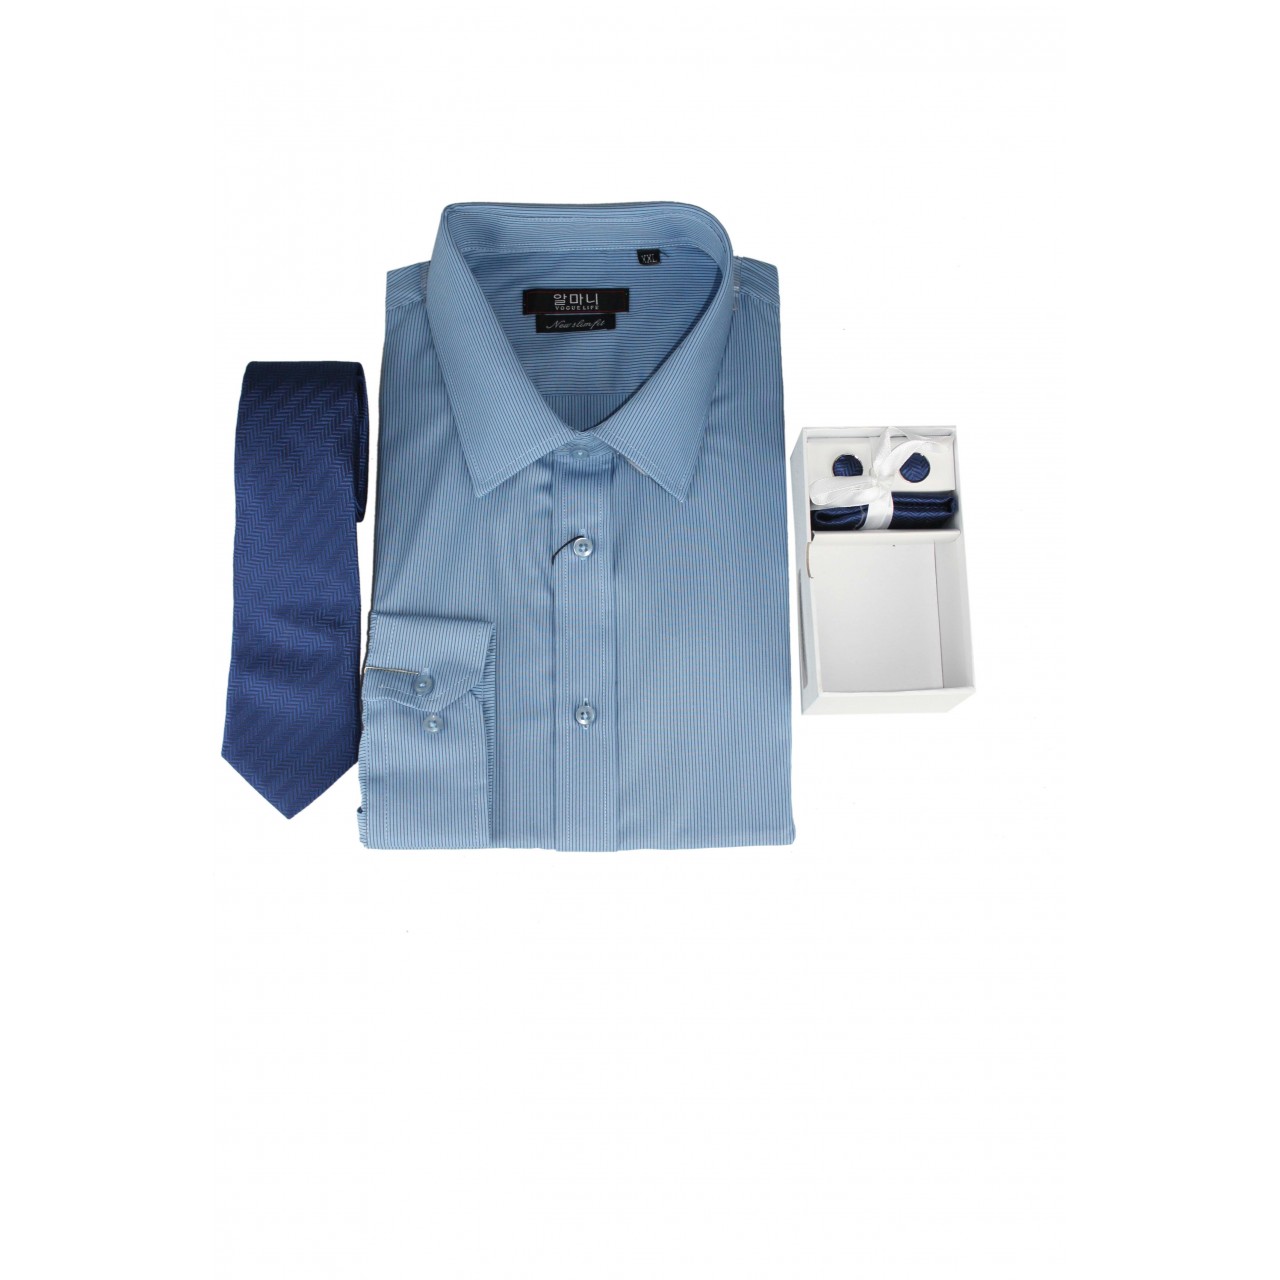 Vogue Life Formal Basic White Striped Shades Men Blue Shirts With Tie Set Combinations